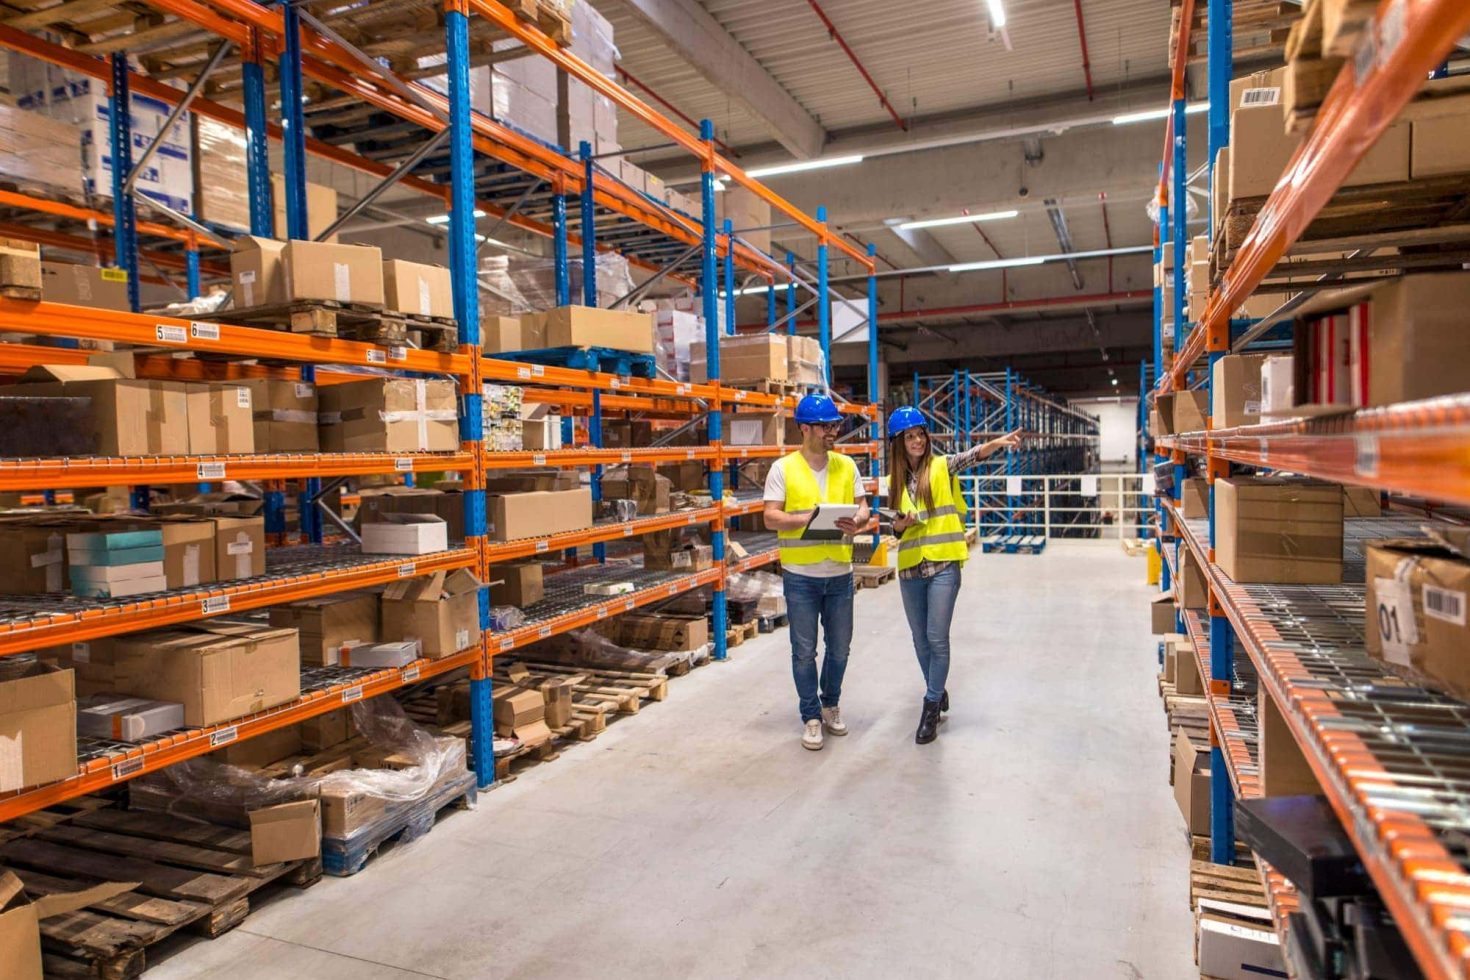 A guide to ecommerce logistics and warehousing